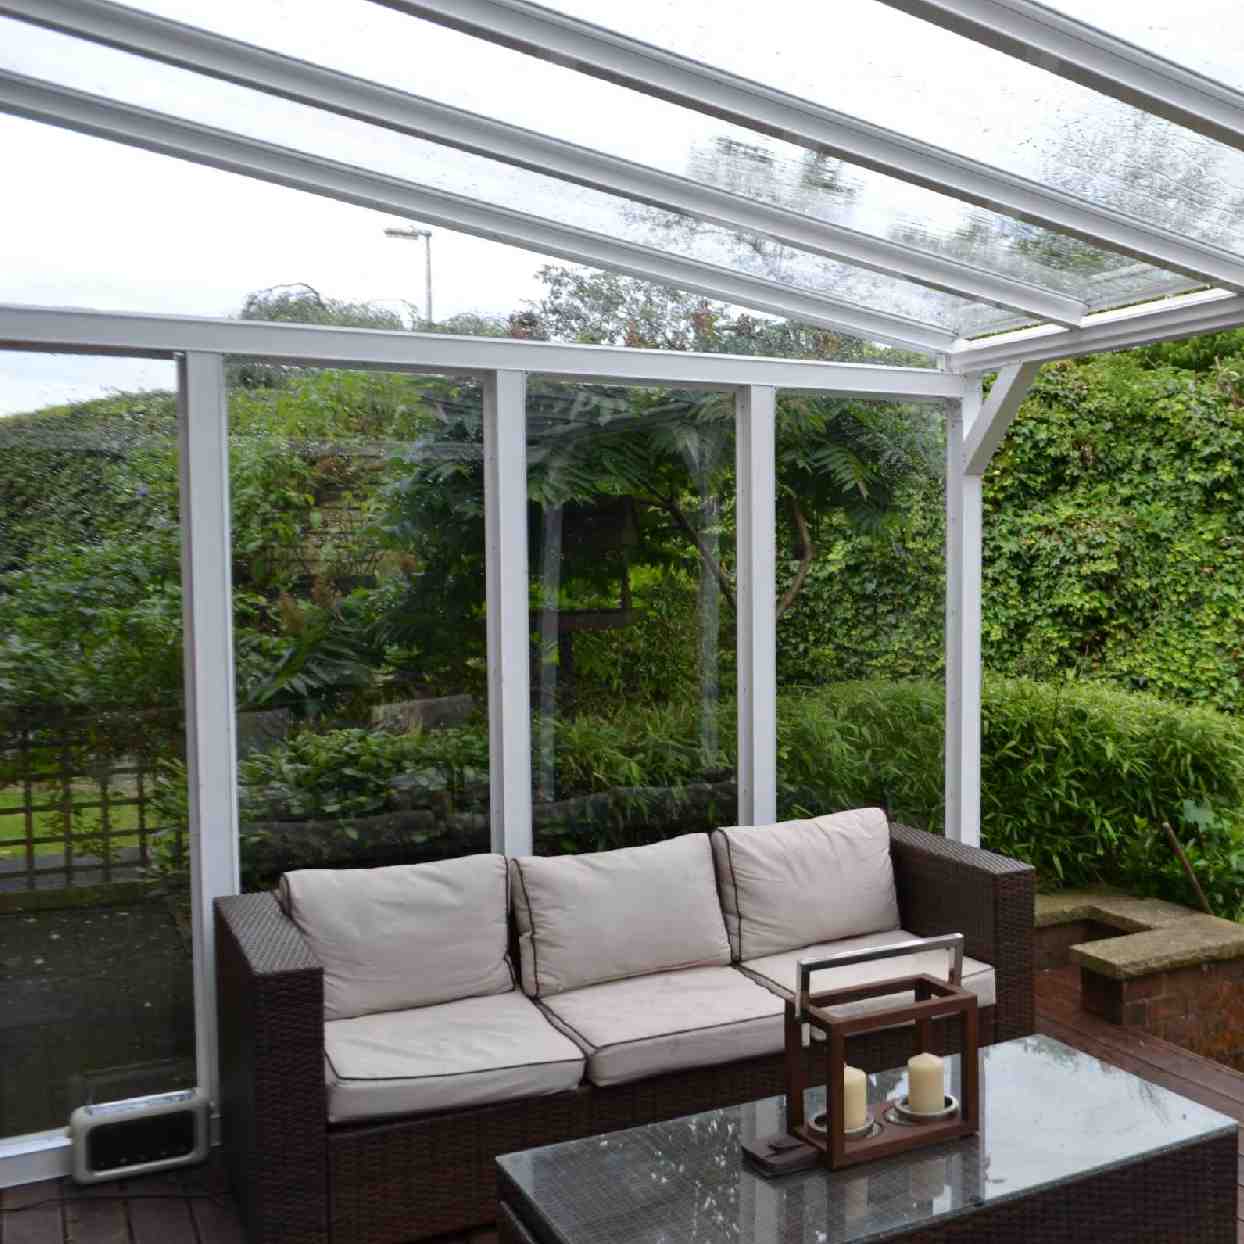 Buy Omega Verandah White with 16mm Polycarbonate Glazing - 4.2m (W) x 2.0m (P), (3) Supporting Posts online today